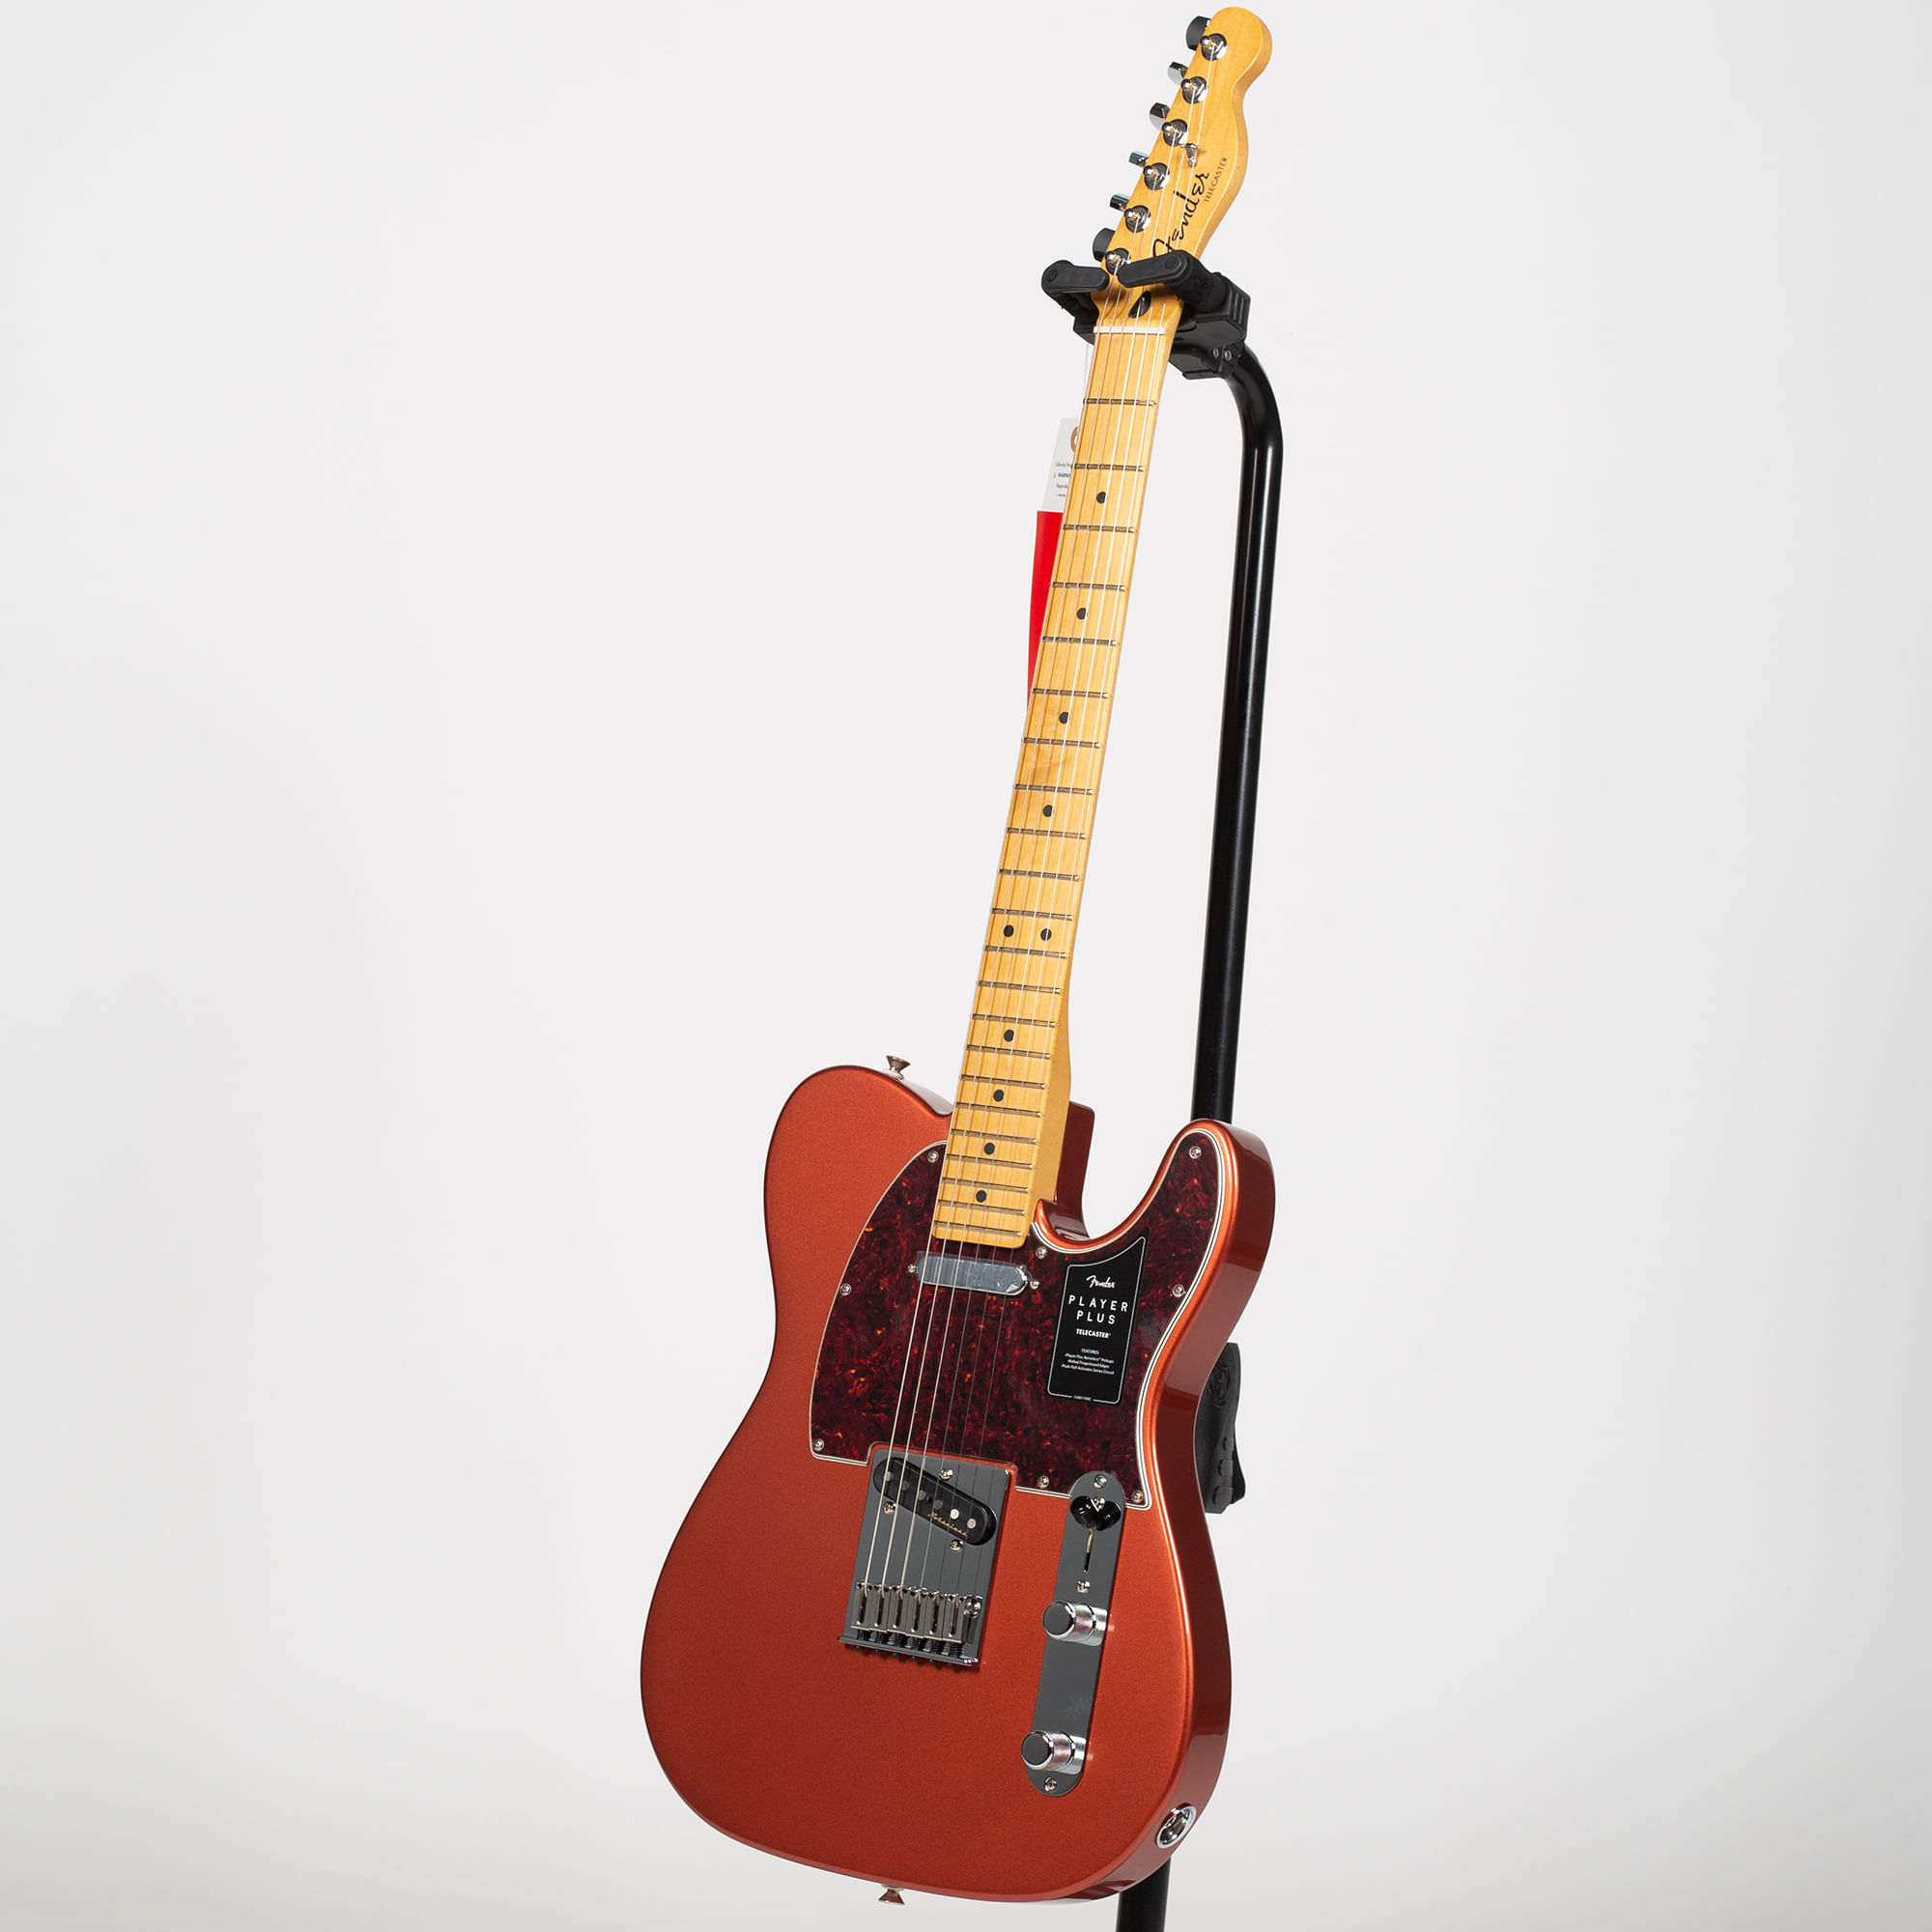 Fender Player Plus Telecaster - Maple, Aged Candy Apple Red